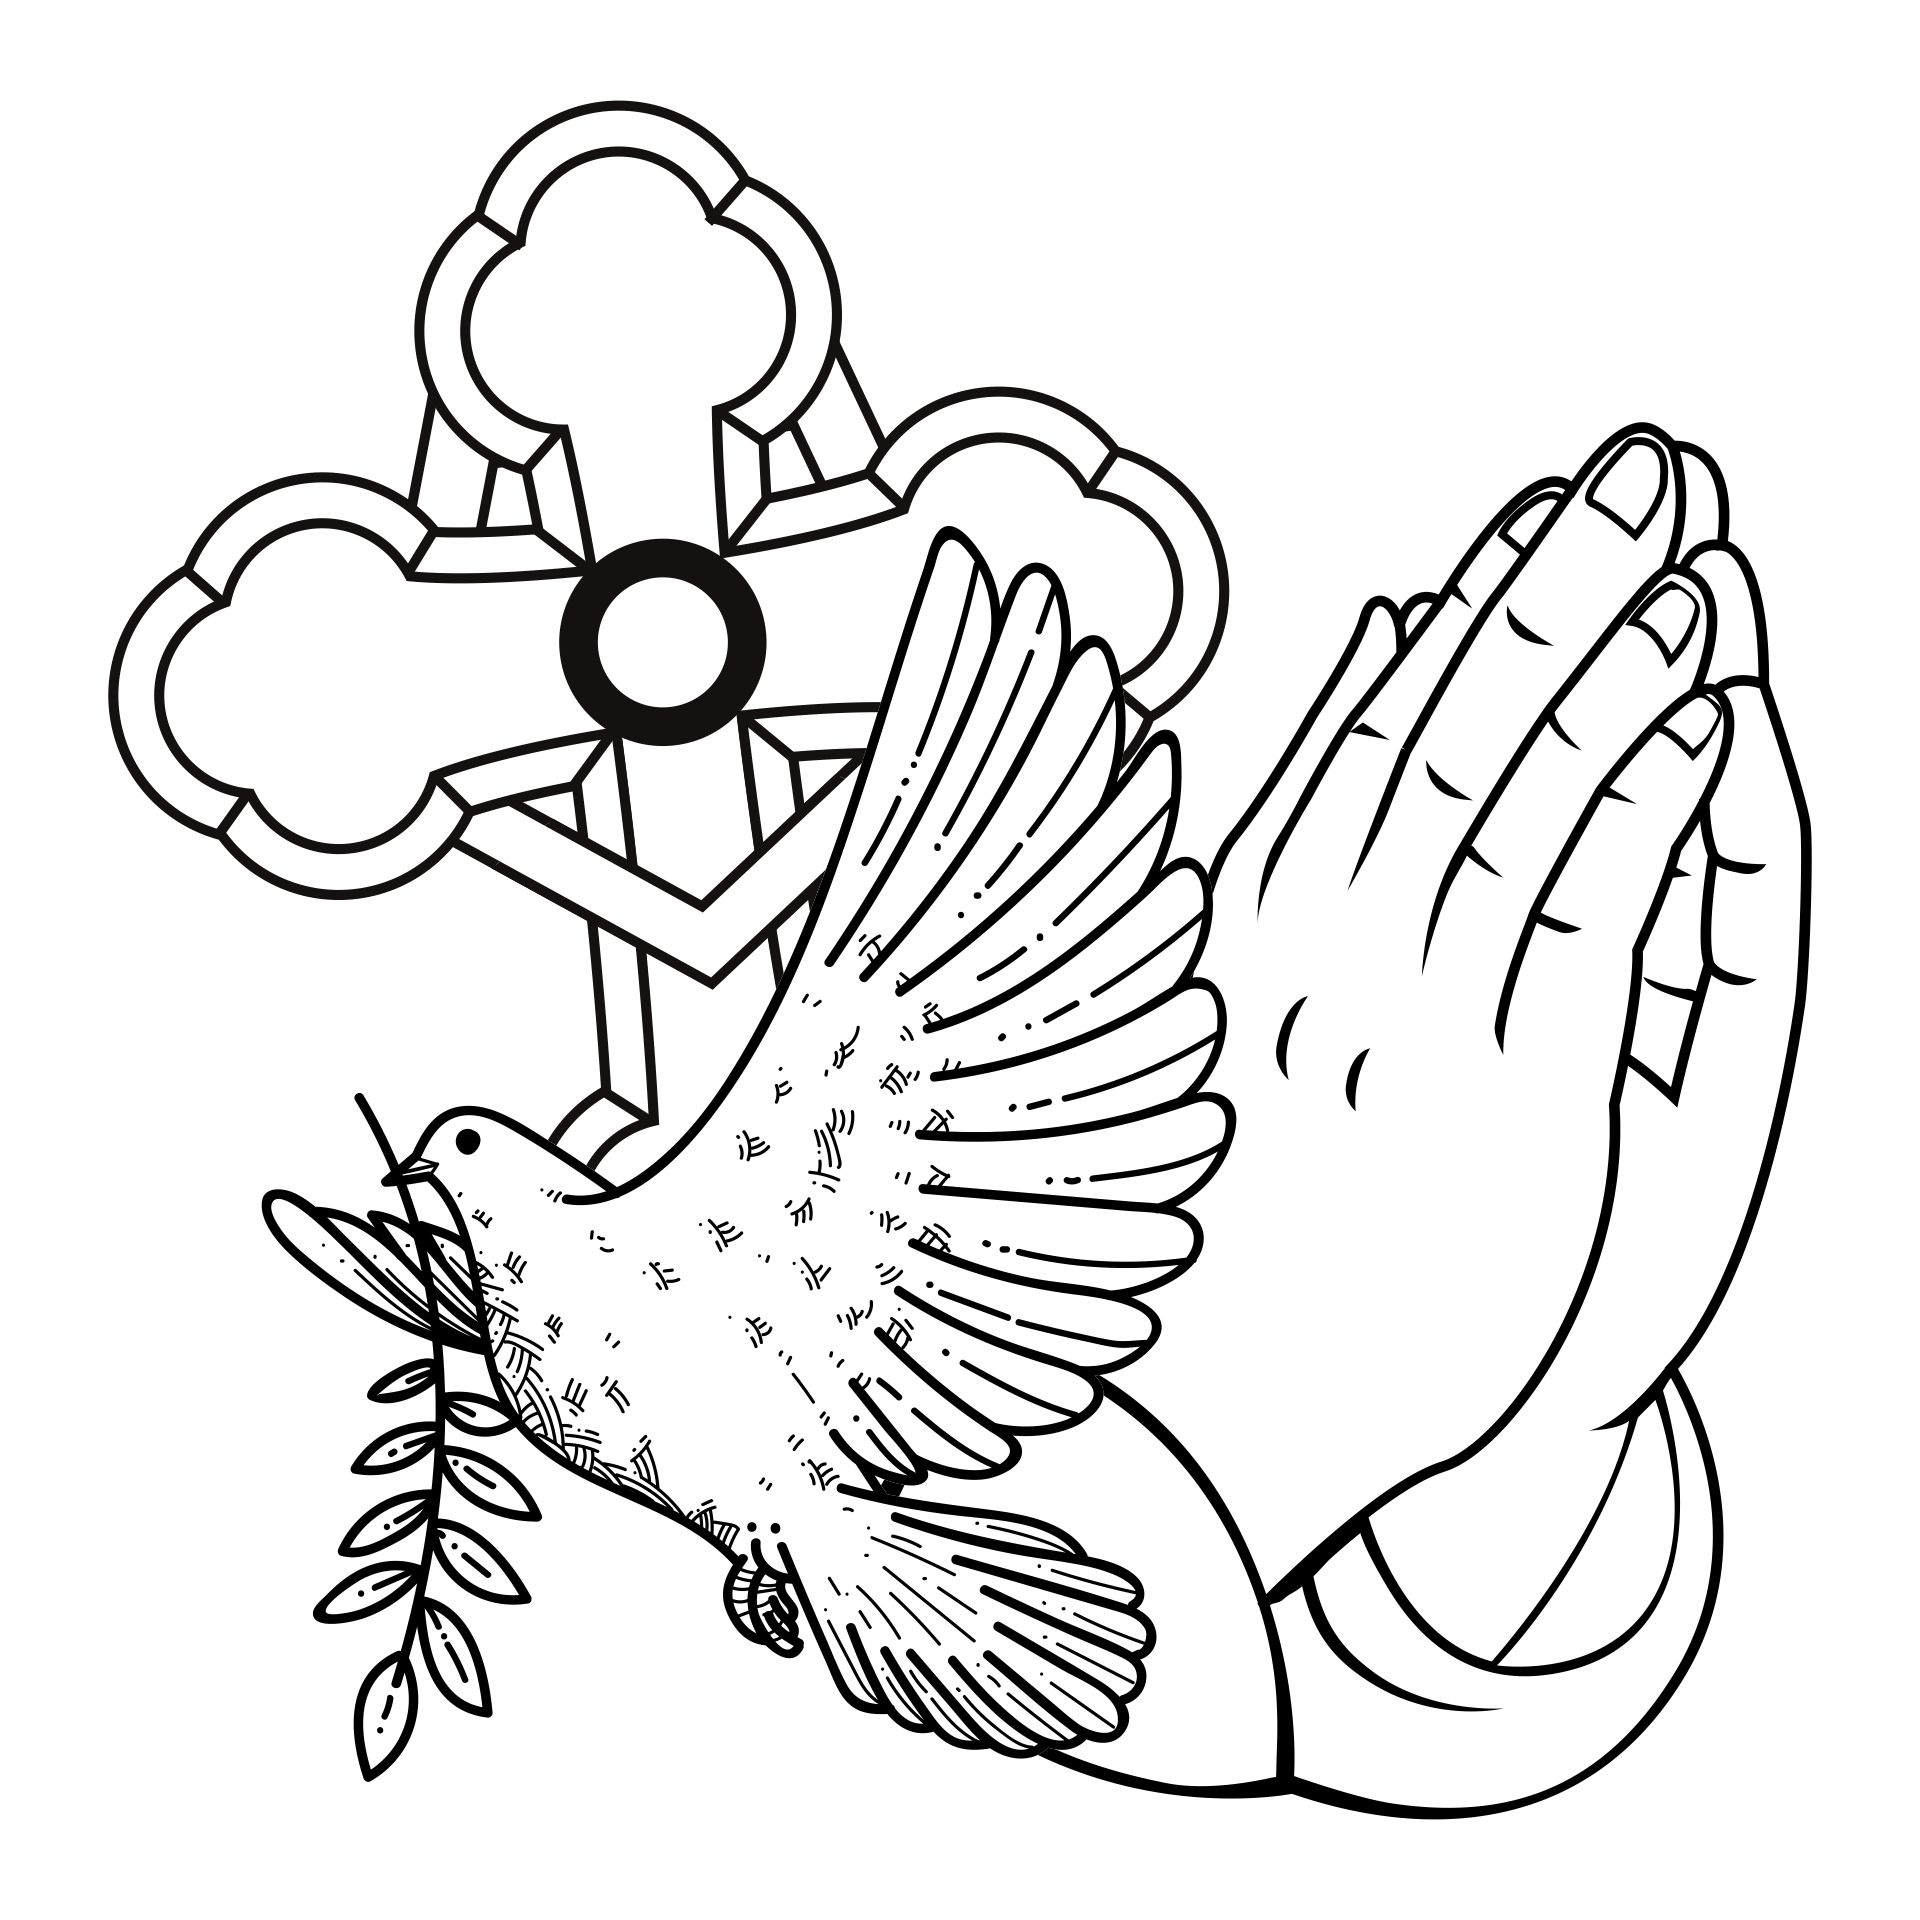 Praying Hands with Dove Tattoo Drawings